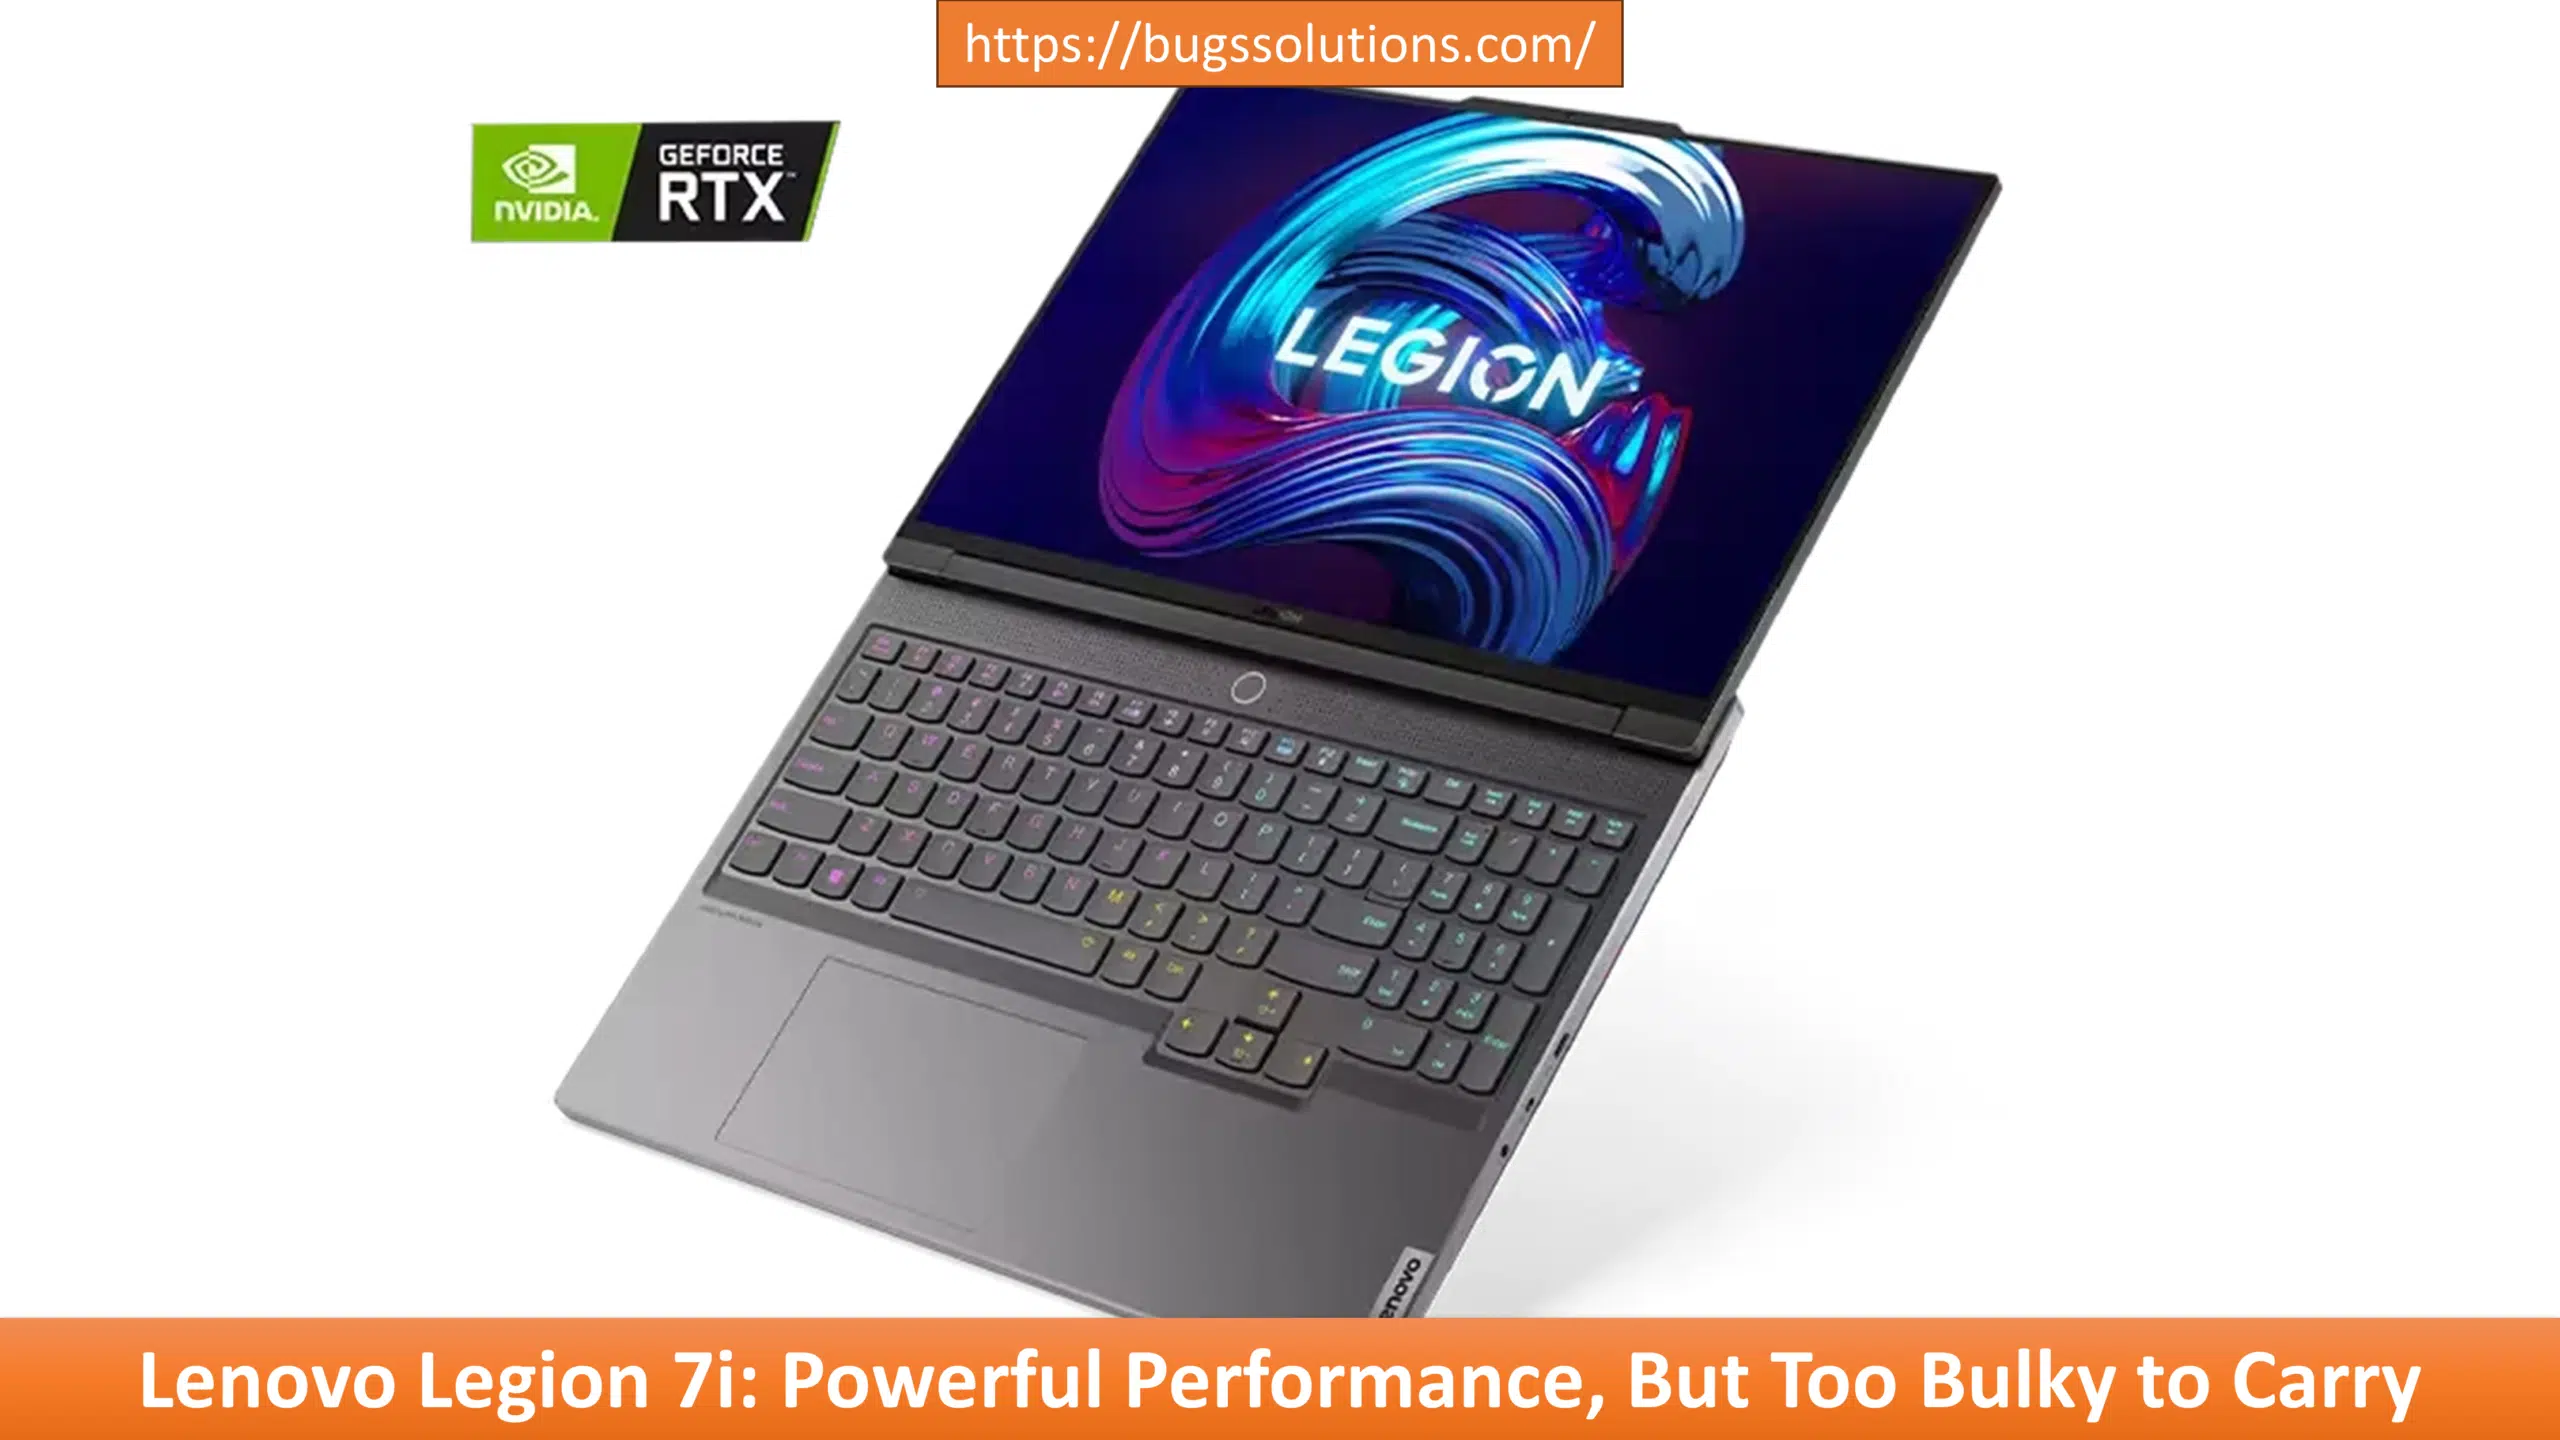 Lenovo Legion 7i: Powerful Performance, But Too Bulky to Carry